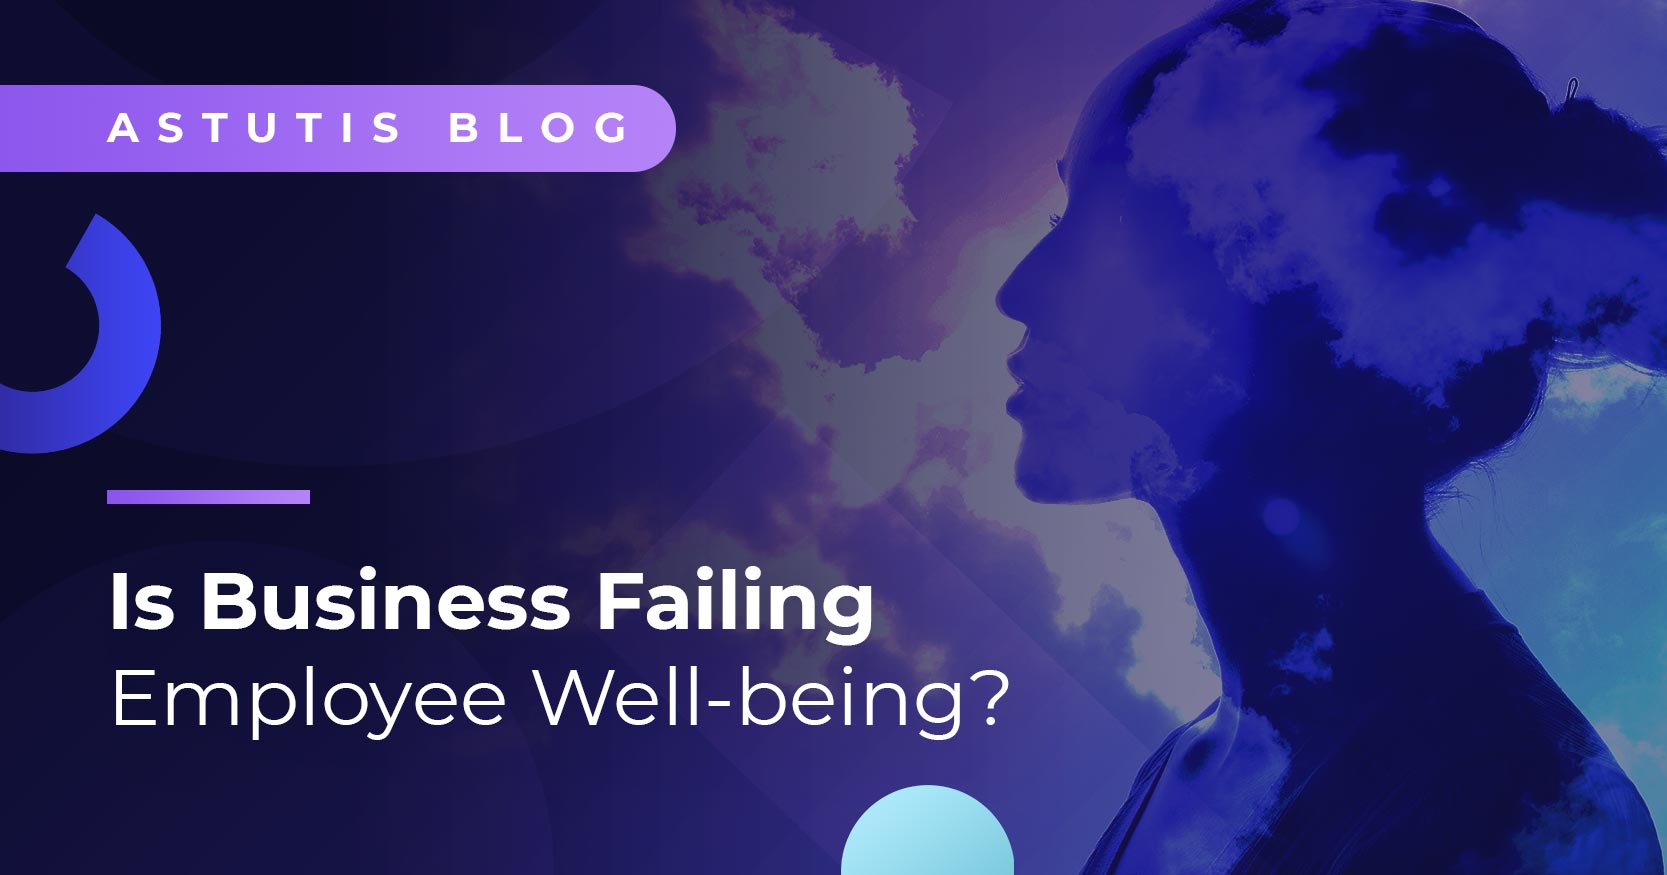 Do Businesses of Today Fail Employee Well-Being? Image